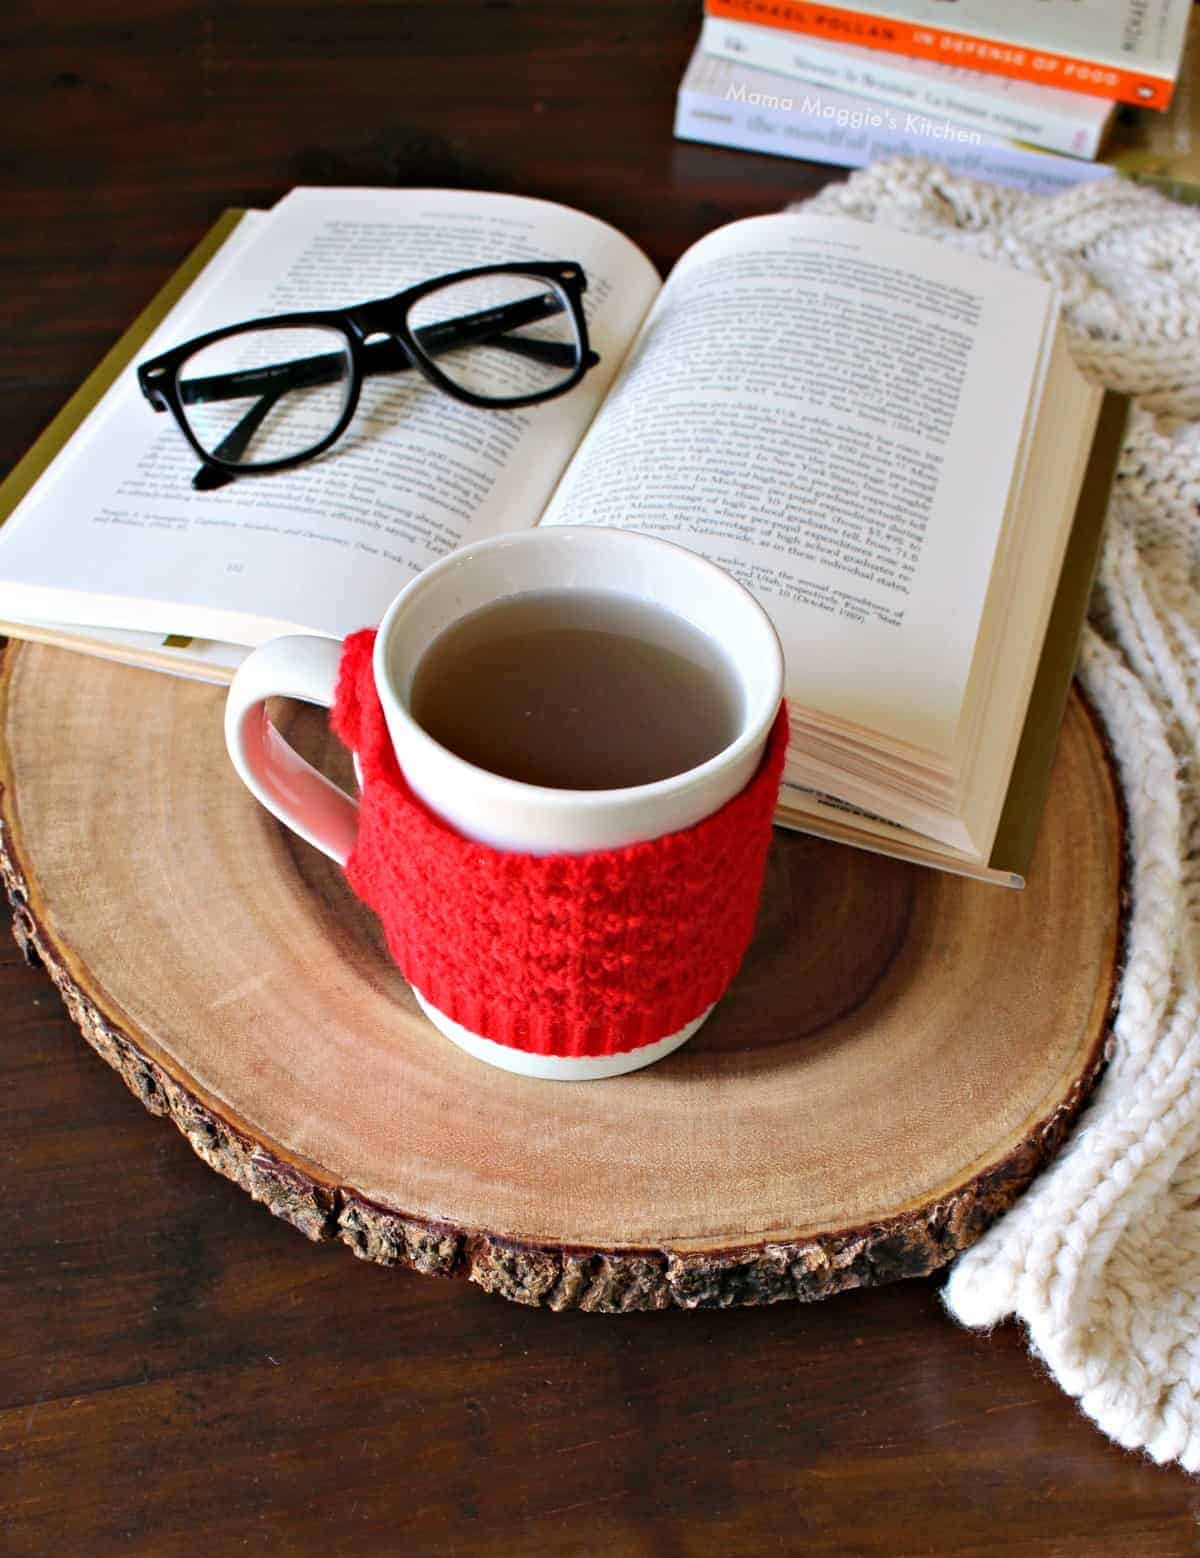 A cup of oregano tea on a wooden surface next to a book and glasses.